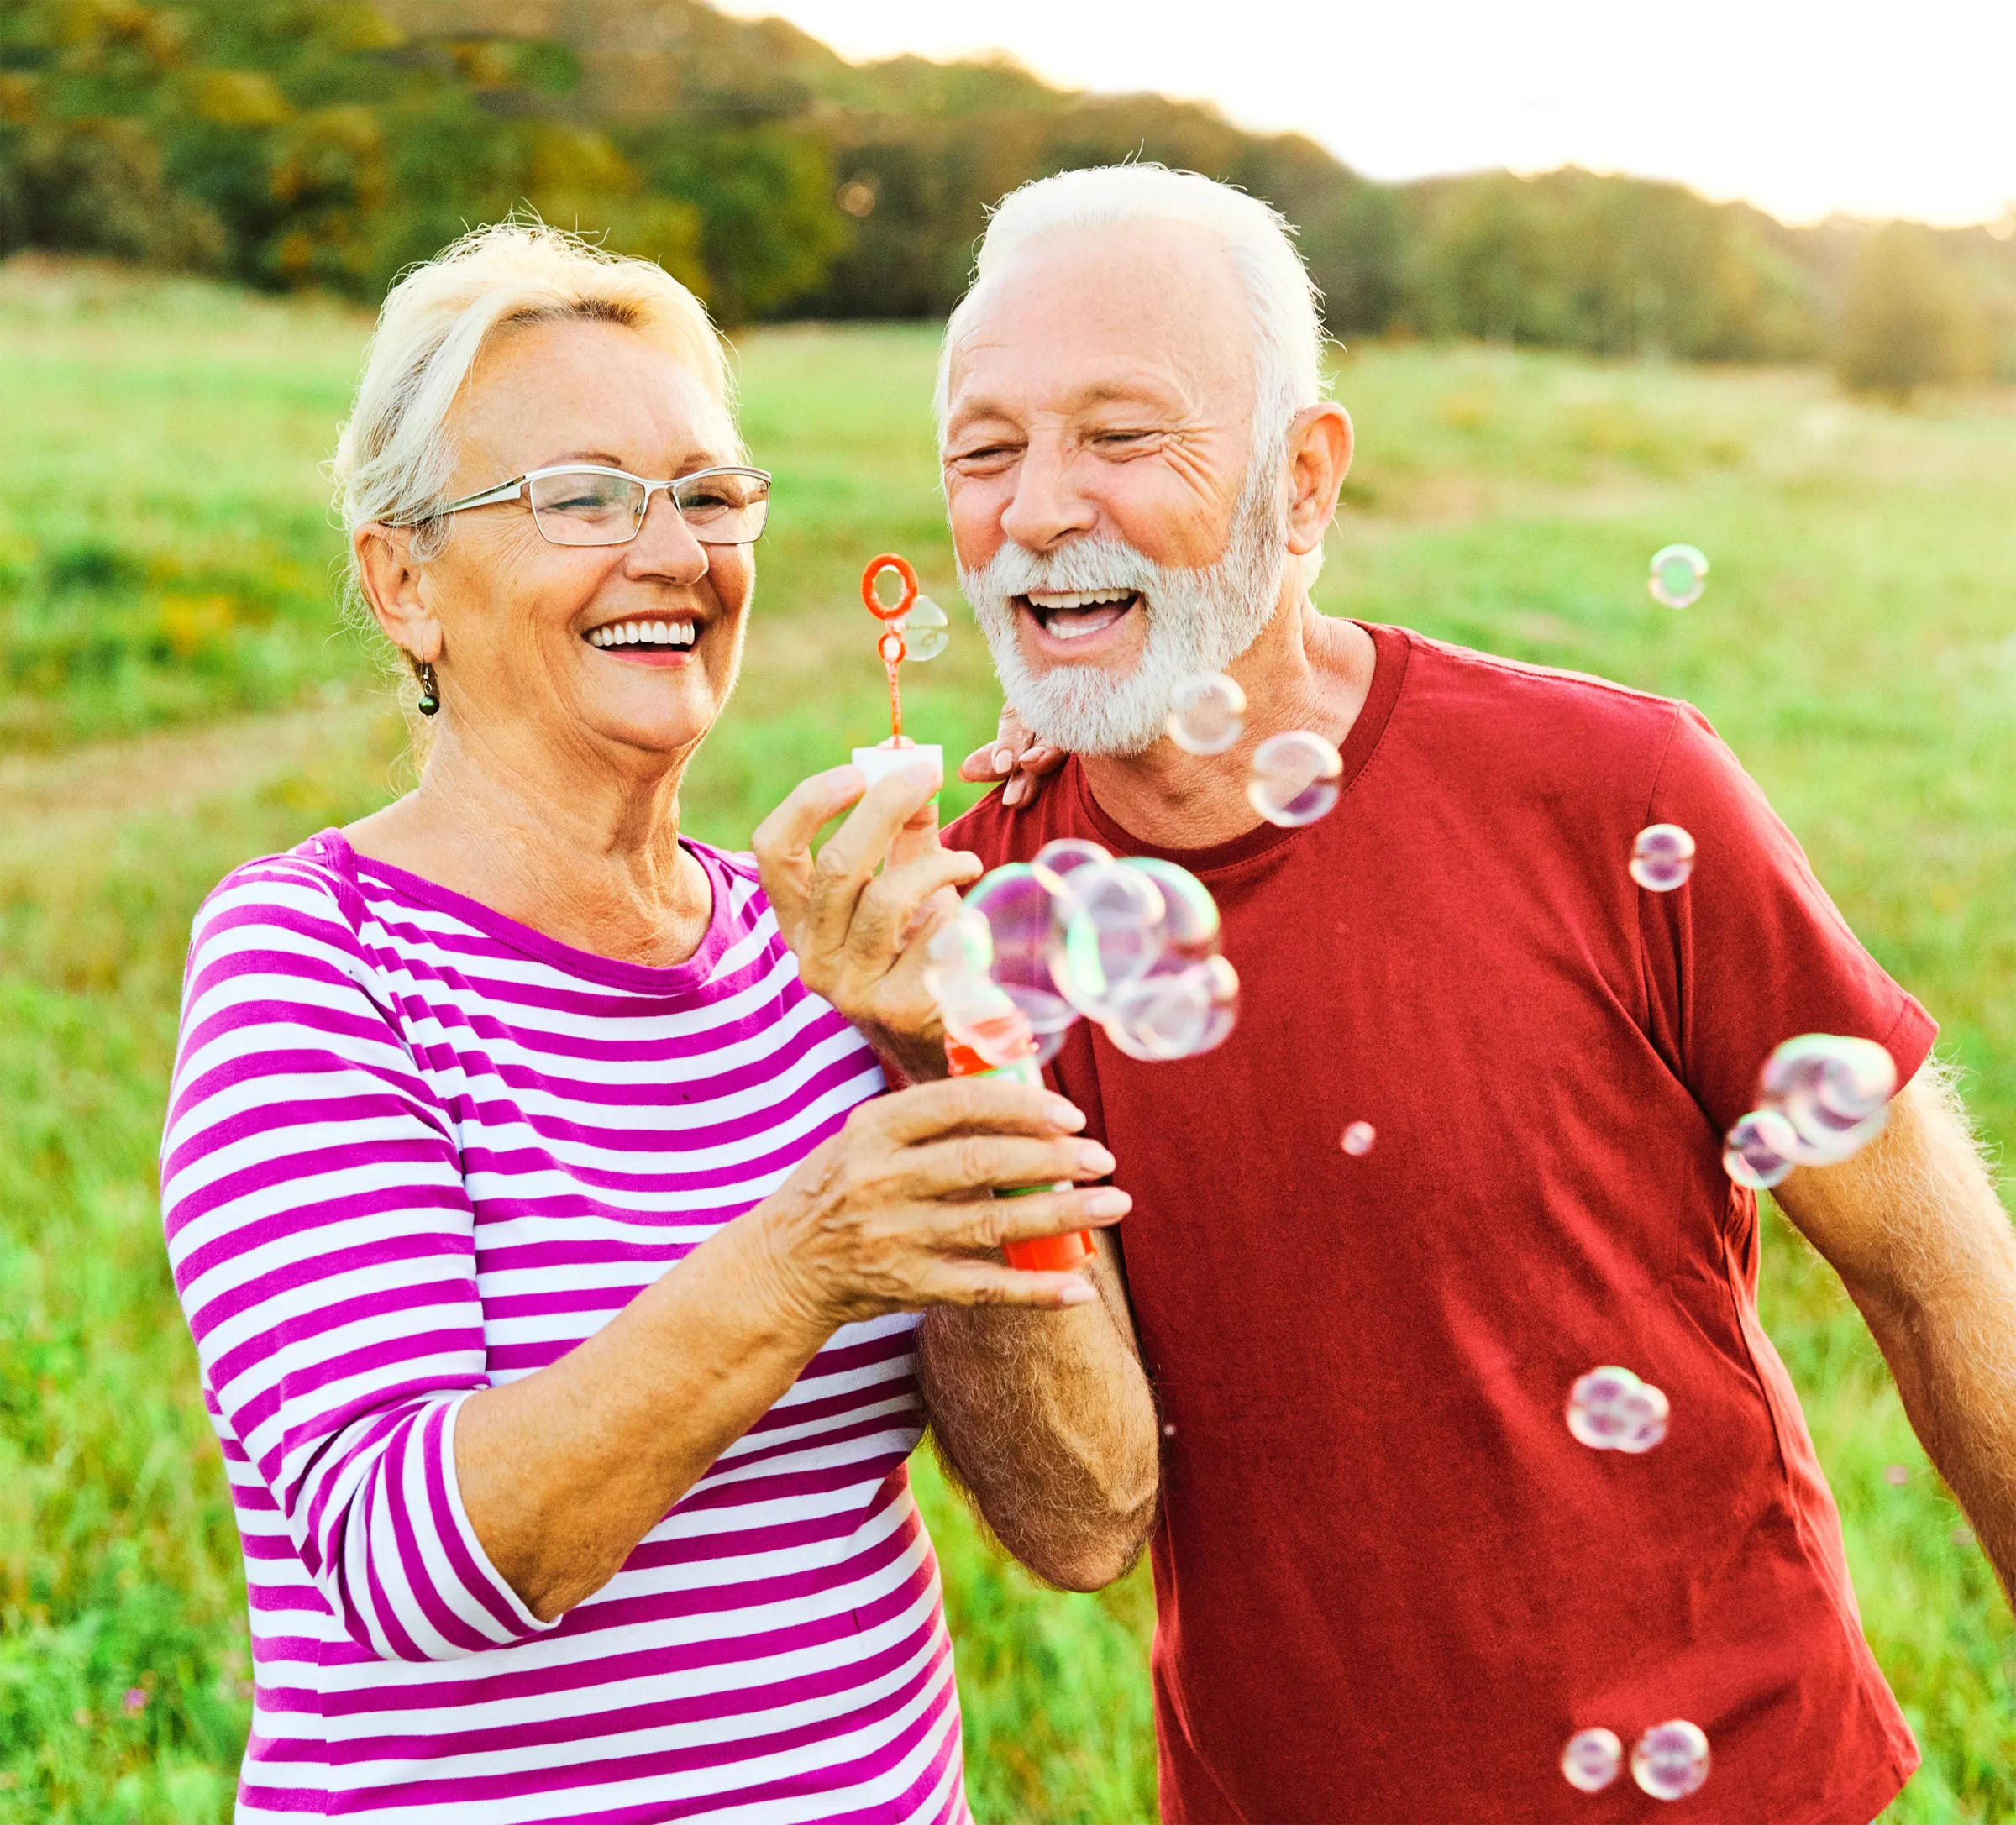 An Assisted Living couple blowing bubbles in a field together.